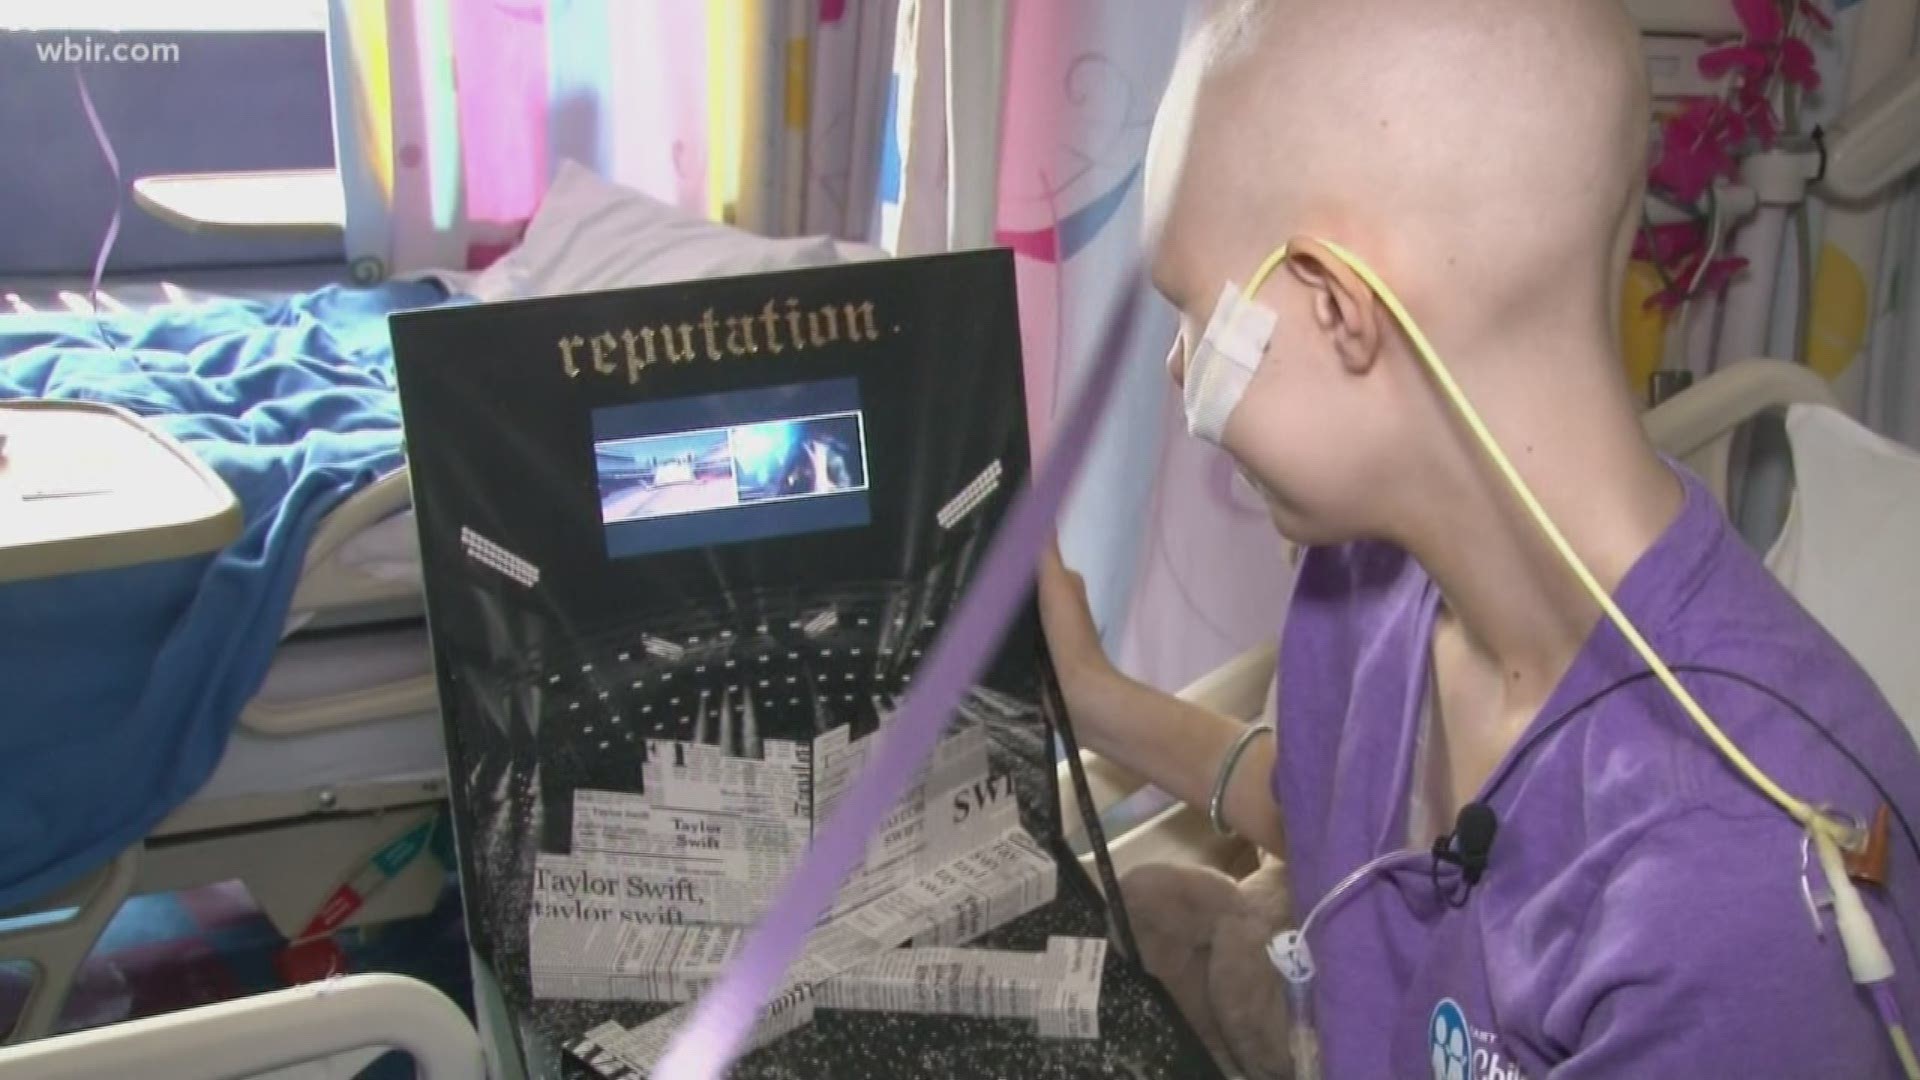 Last Friday, Trinity found out the star made a $10,000 donation to help her pay her medical bills.